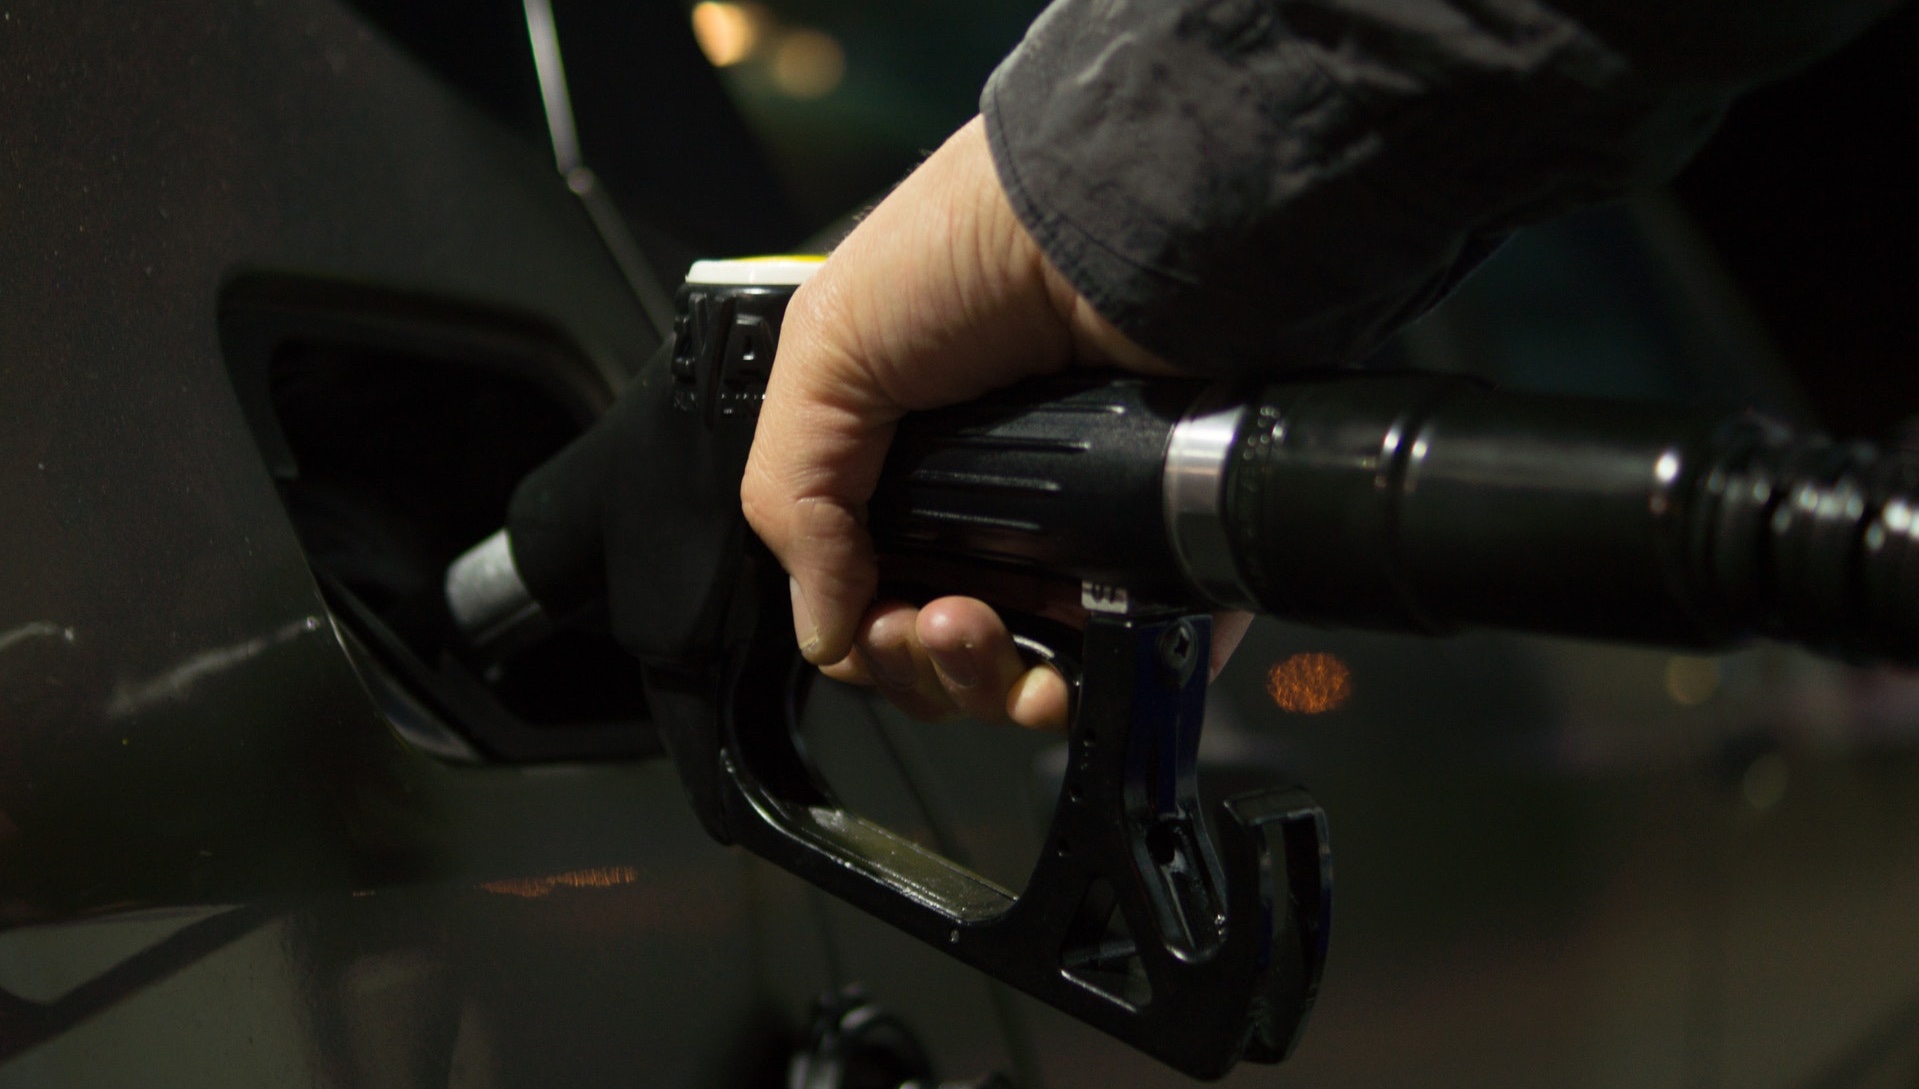 New data indicates fuel prices will be dropping at stations this May weekend.